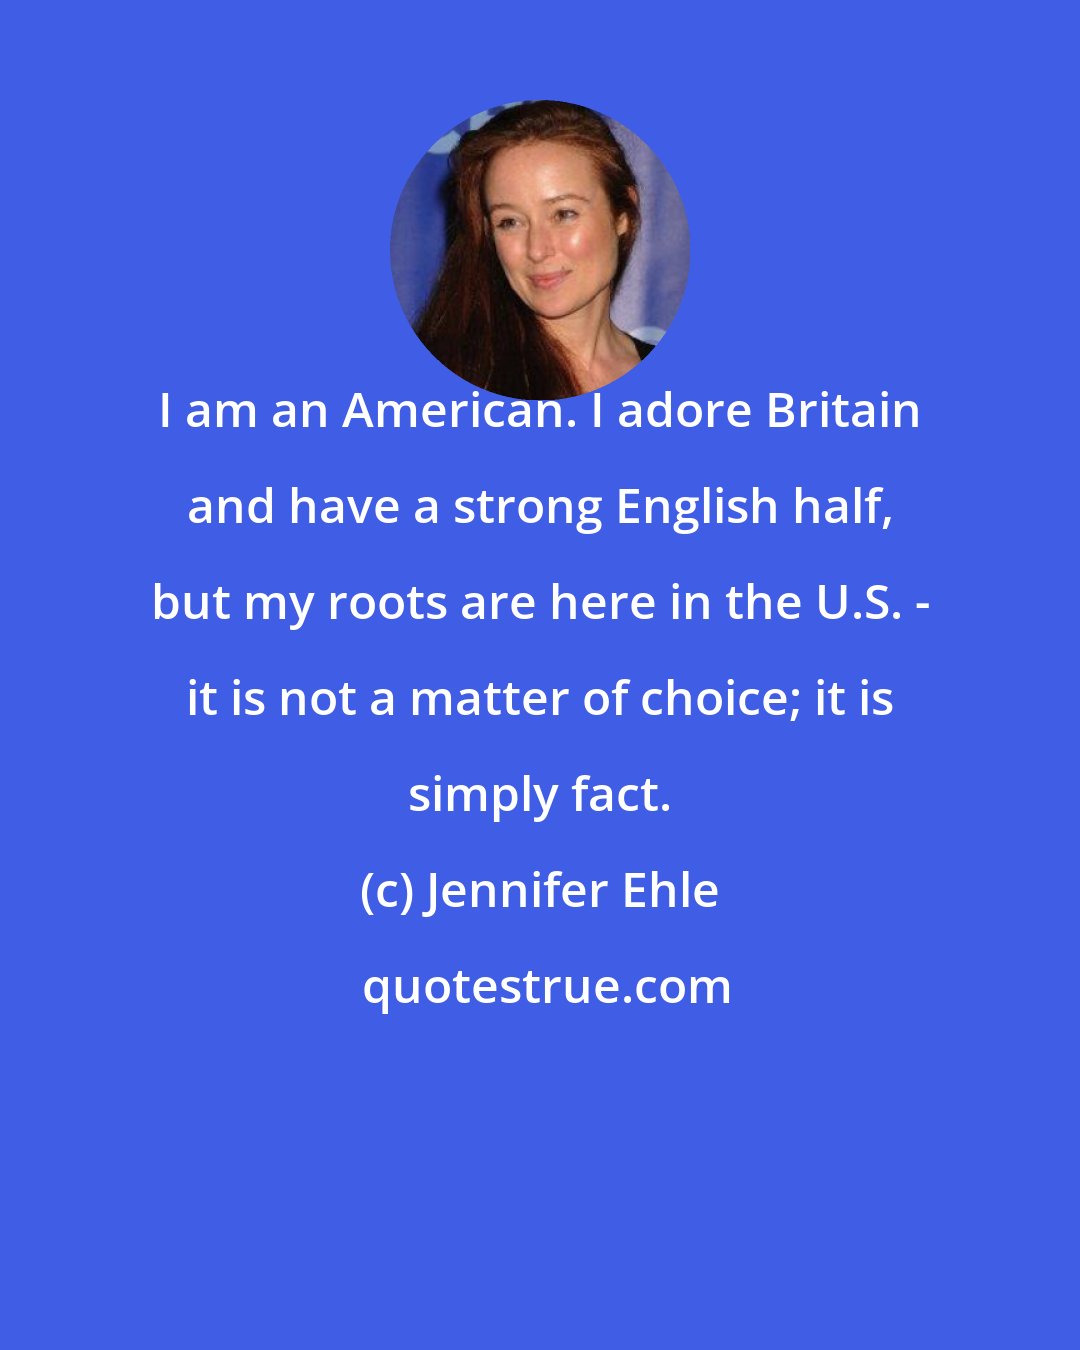 Jennifer Ehle: I am an American. I adore Britain and have a strong English half, but my roots are here in the U.S. - it is not a matter of choice; it is simply fact.